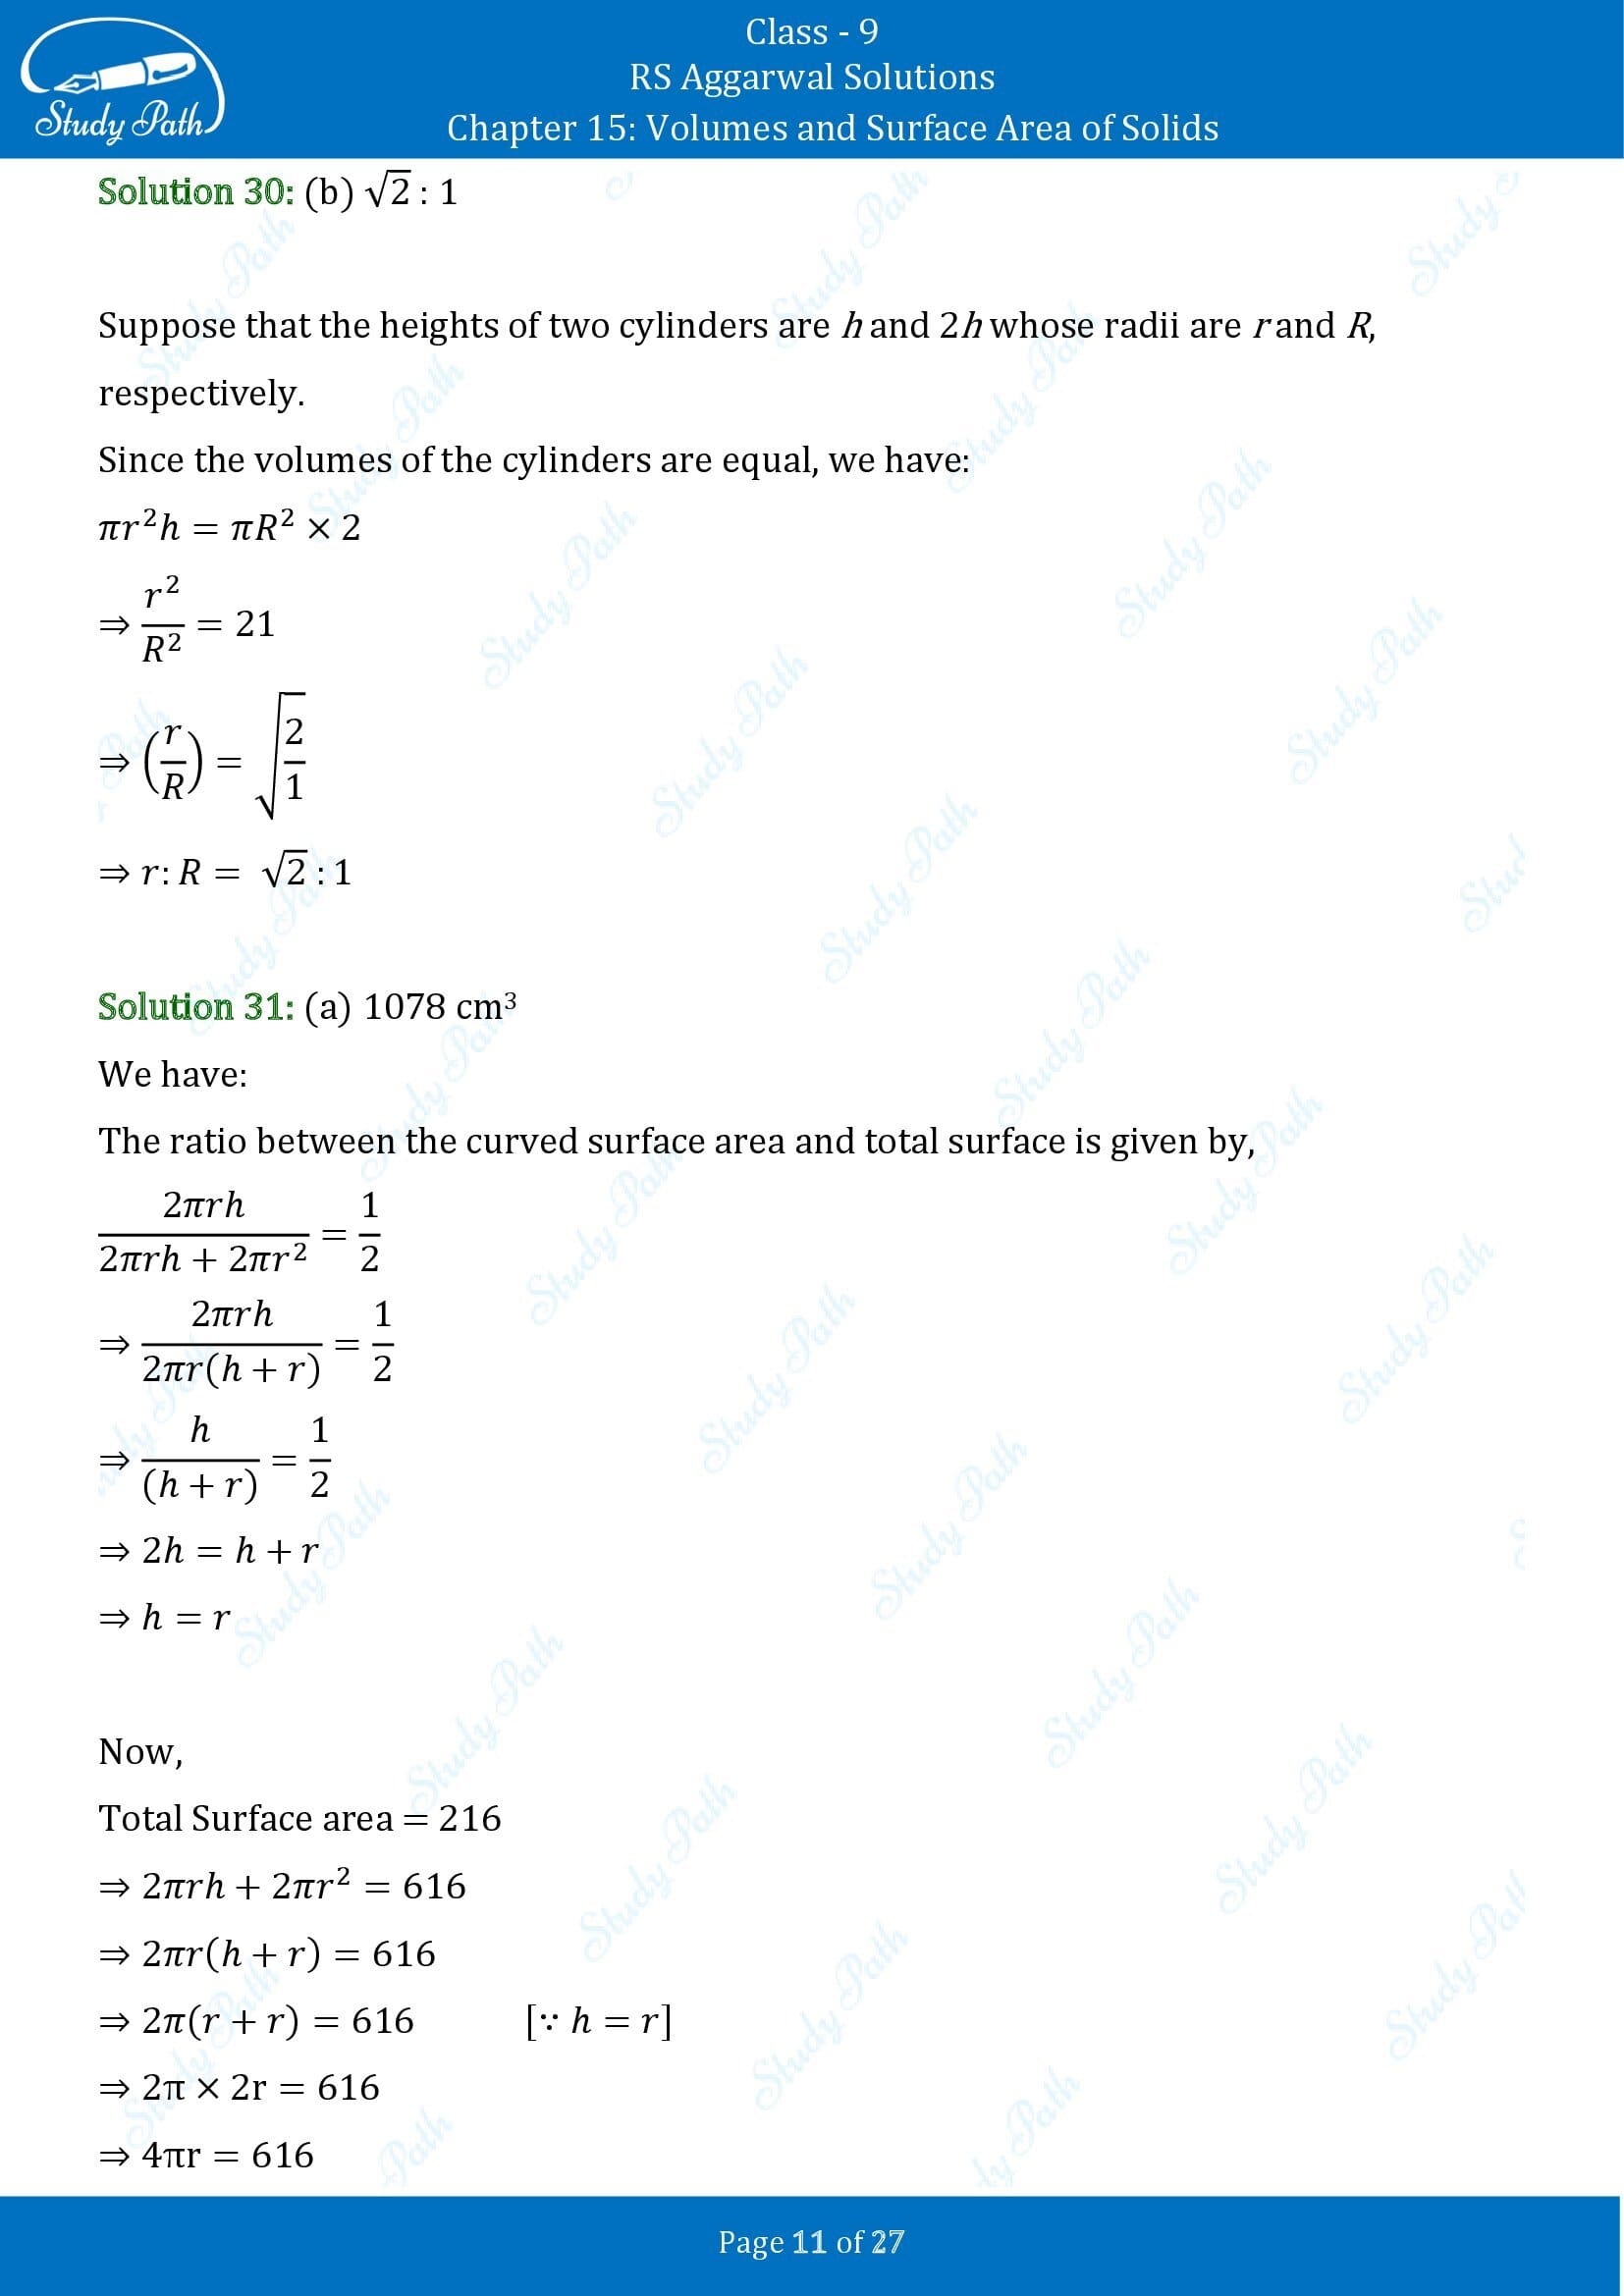 RS Aggarwal Solutions Class 9 Chapter 15 Volumes and Surface Area of Solids Multiple Choice Questions MCQs 00011